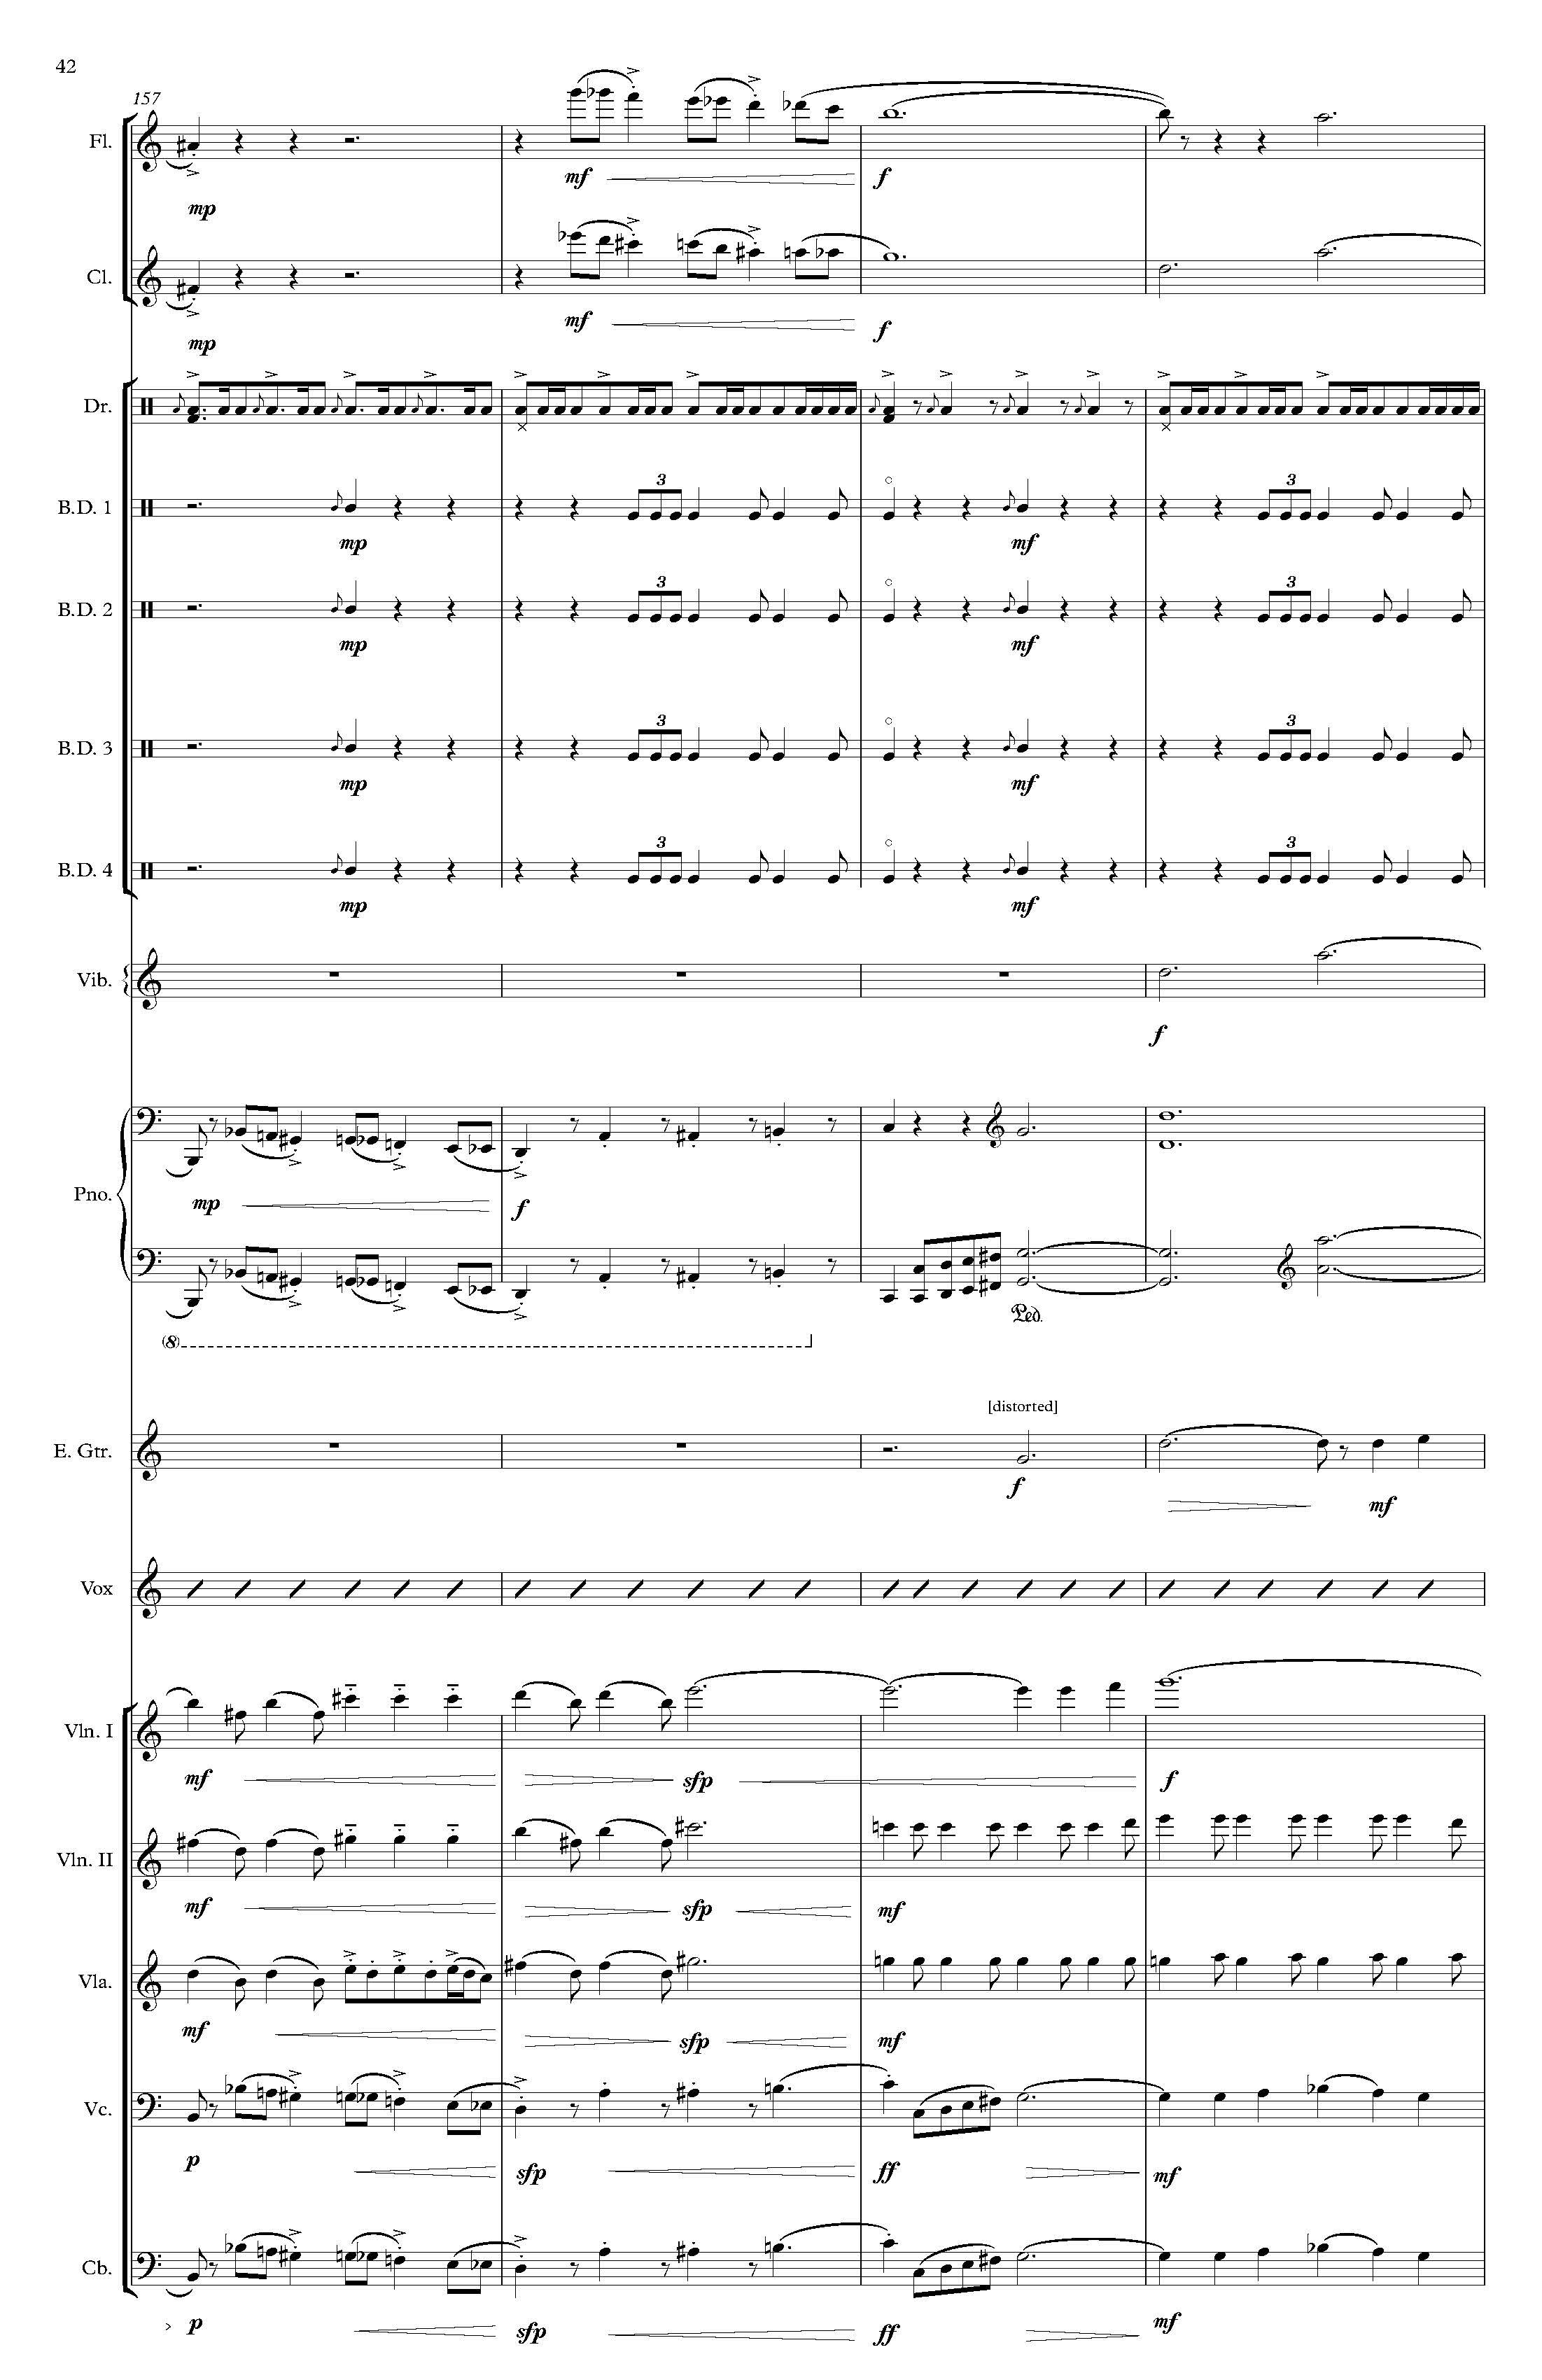 The Rembrandt of Avenue A - Complete Score_Page_48.jpg